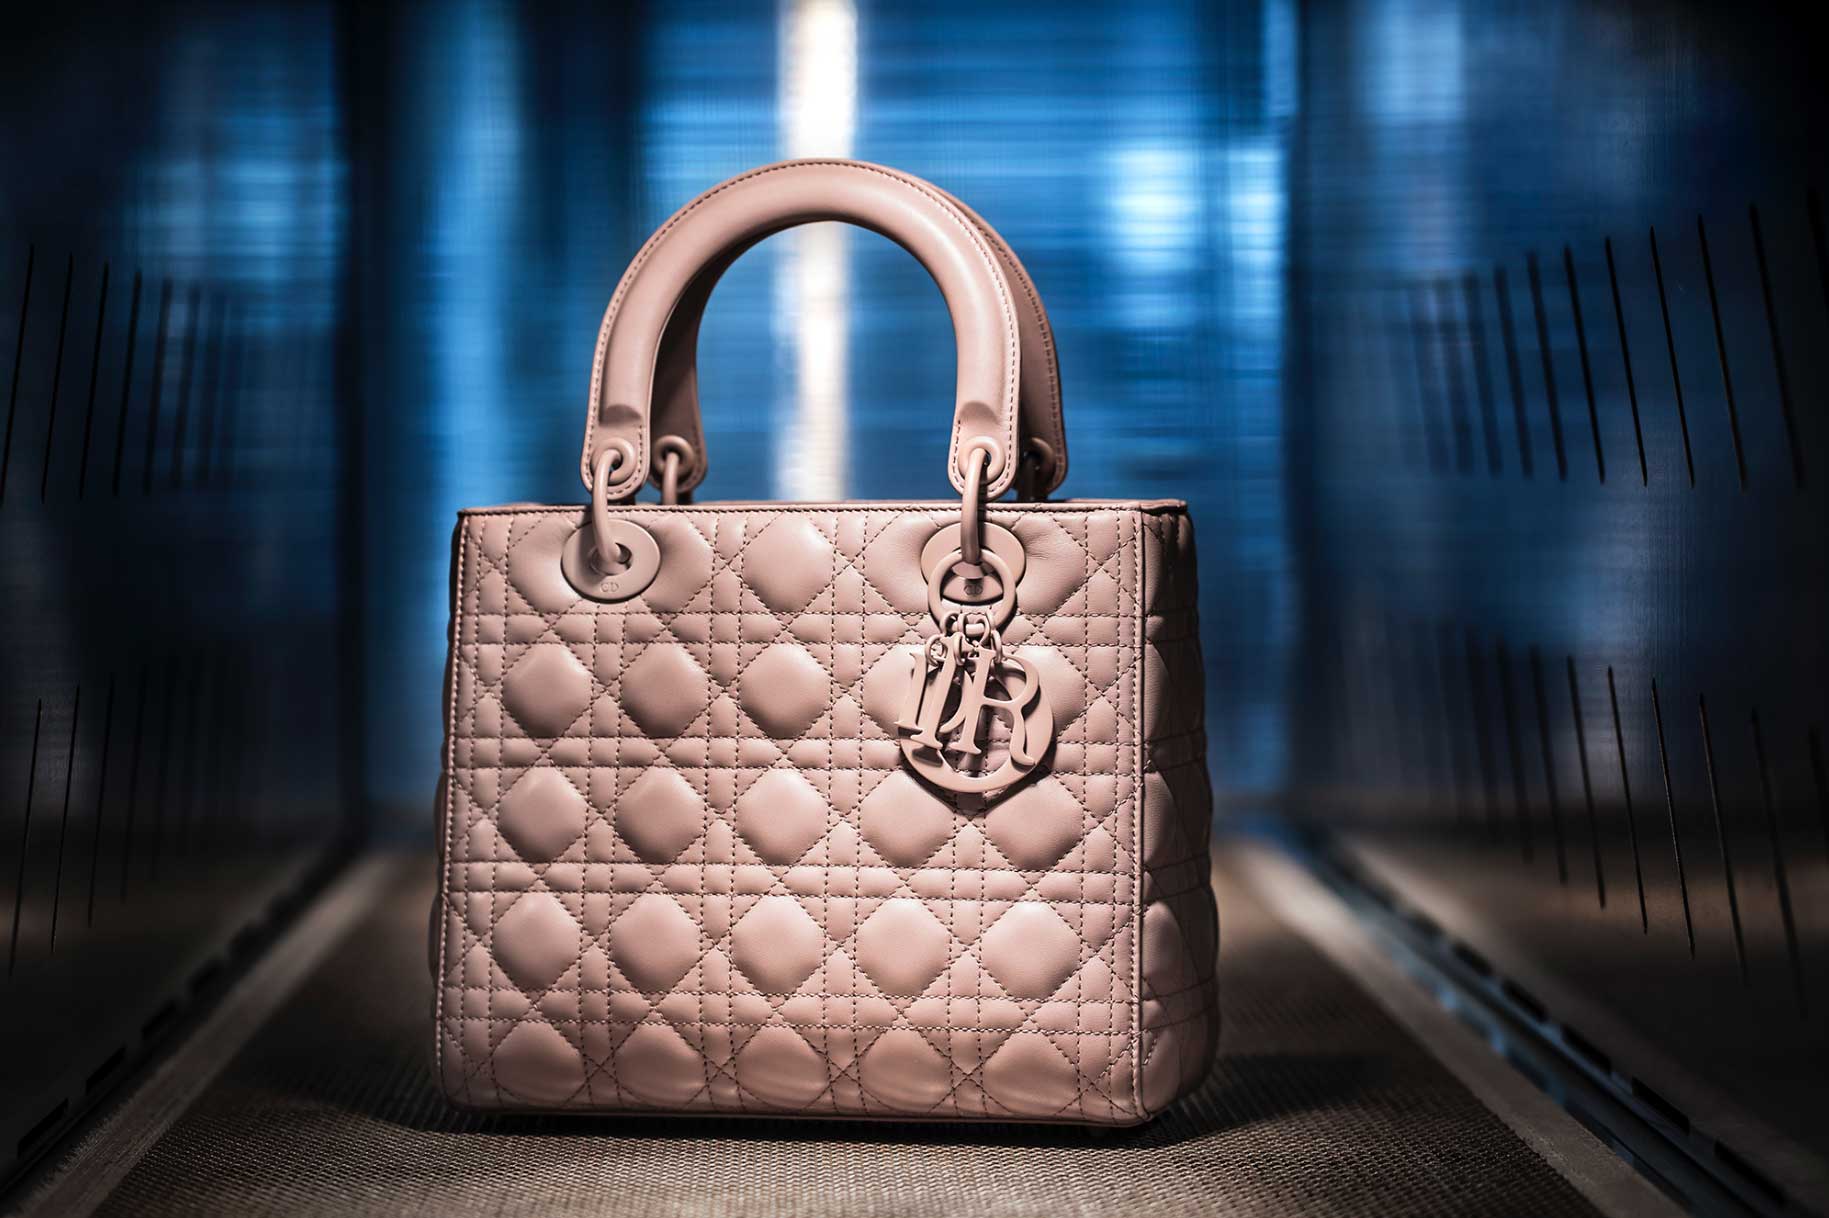 Discover The Savoir-Faire Of Dior's Most Iconic Handbag - MOJEH